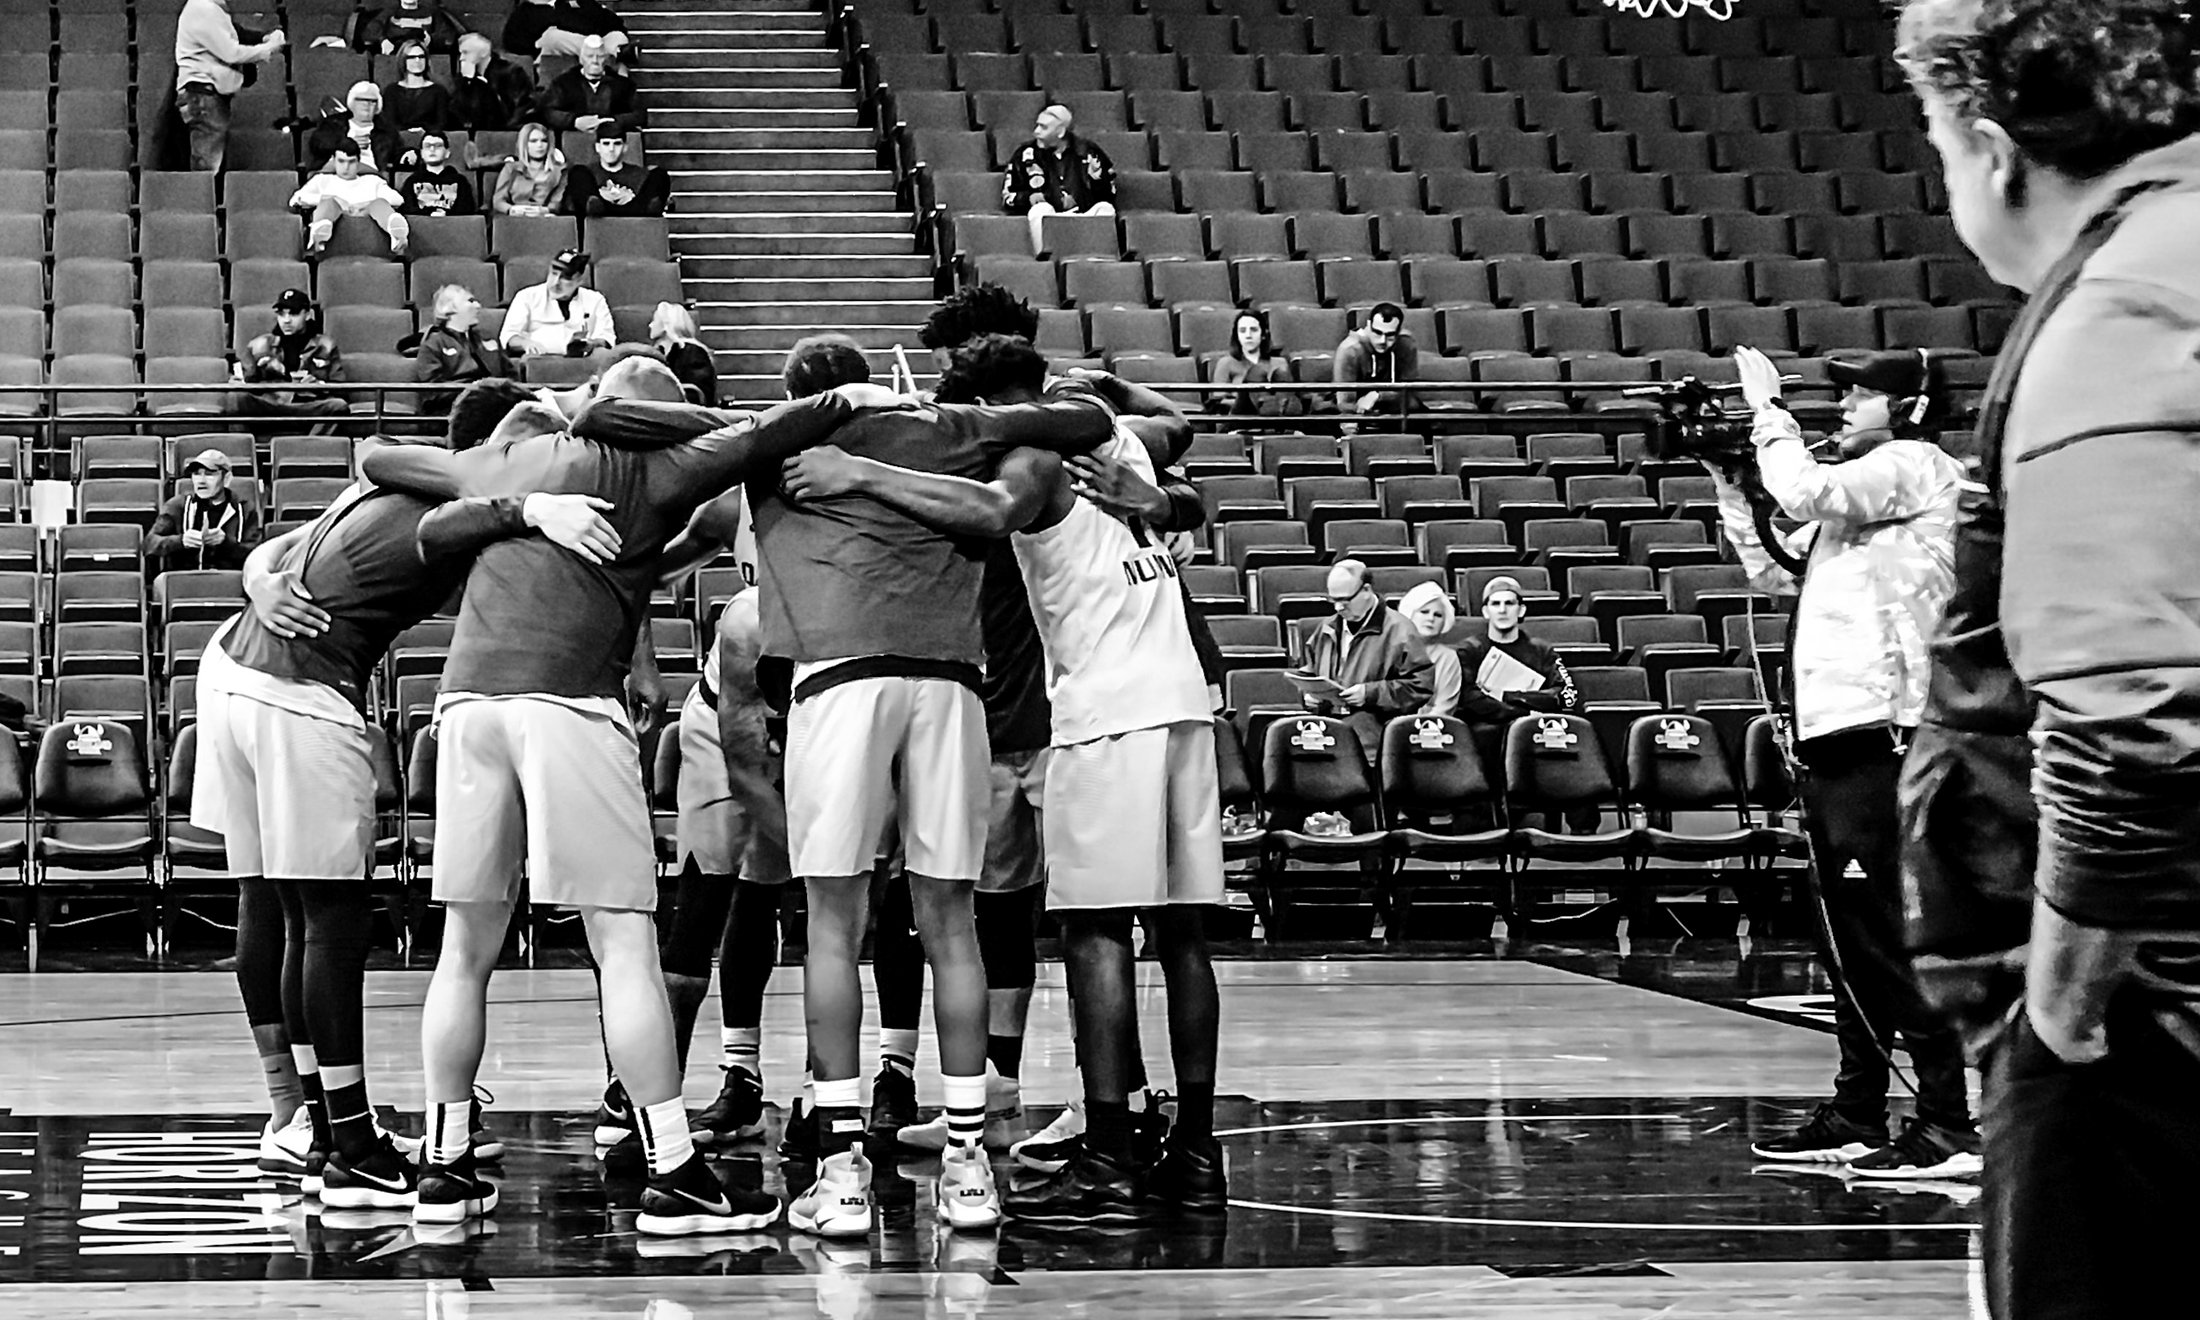 Black and white photo of men's basketball team before a game with coach kampe watching them